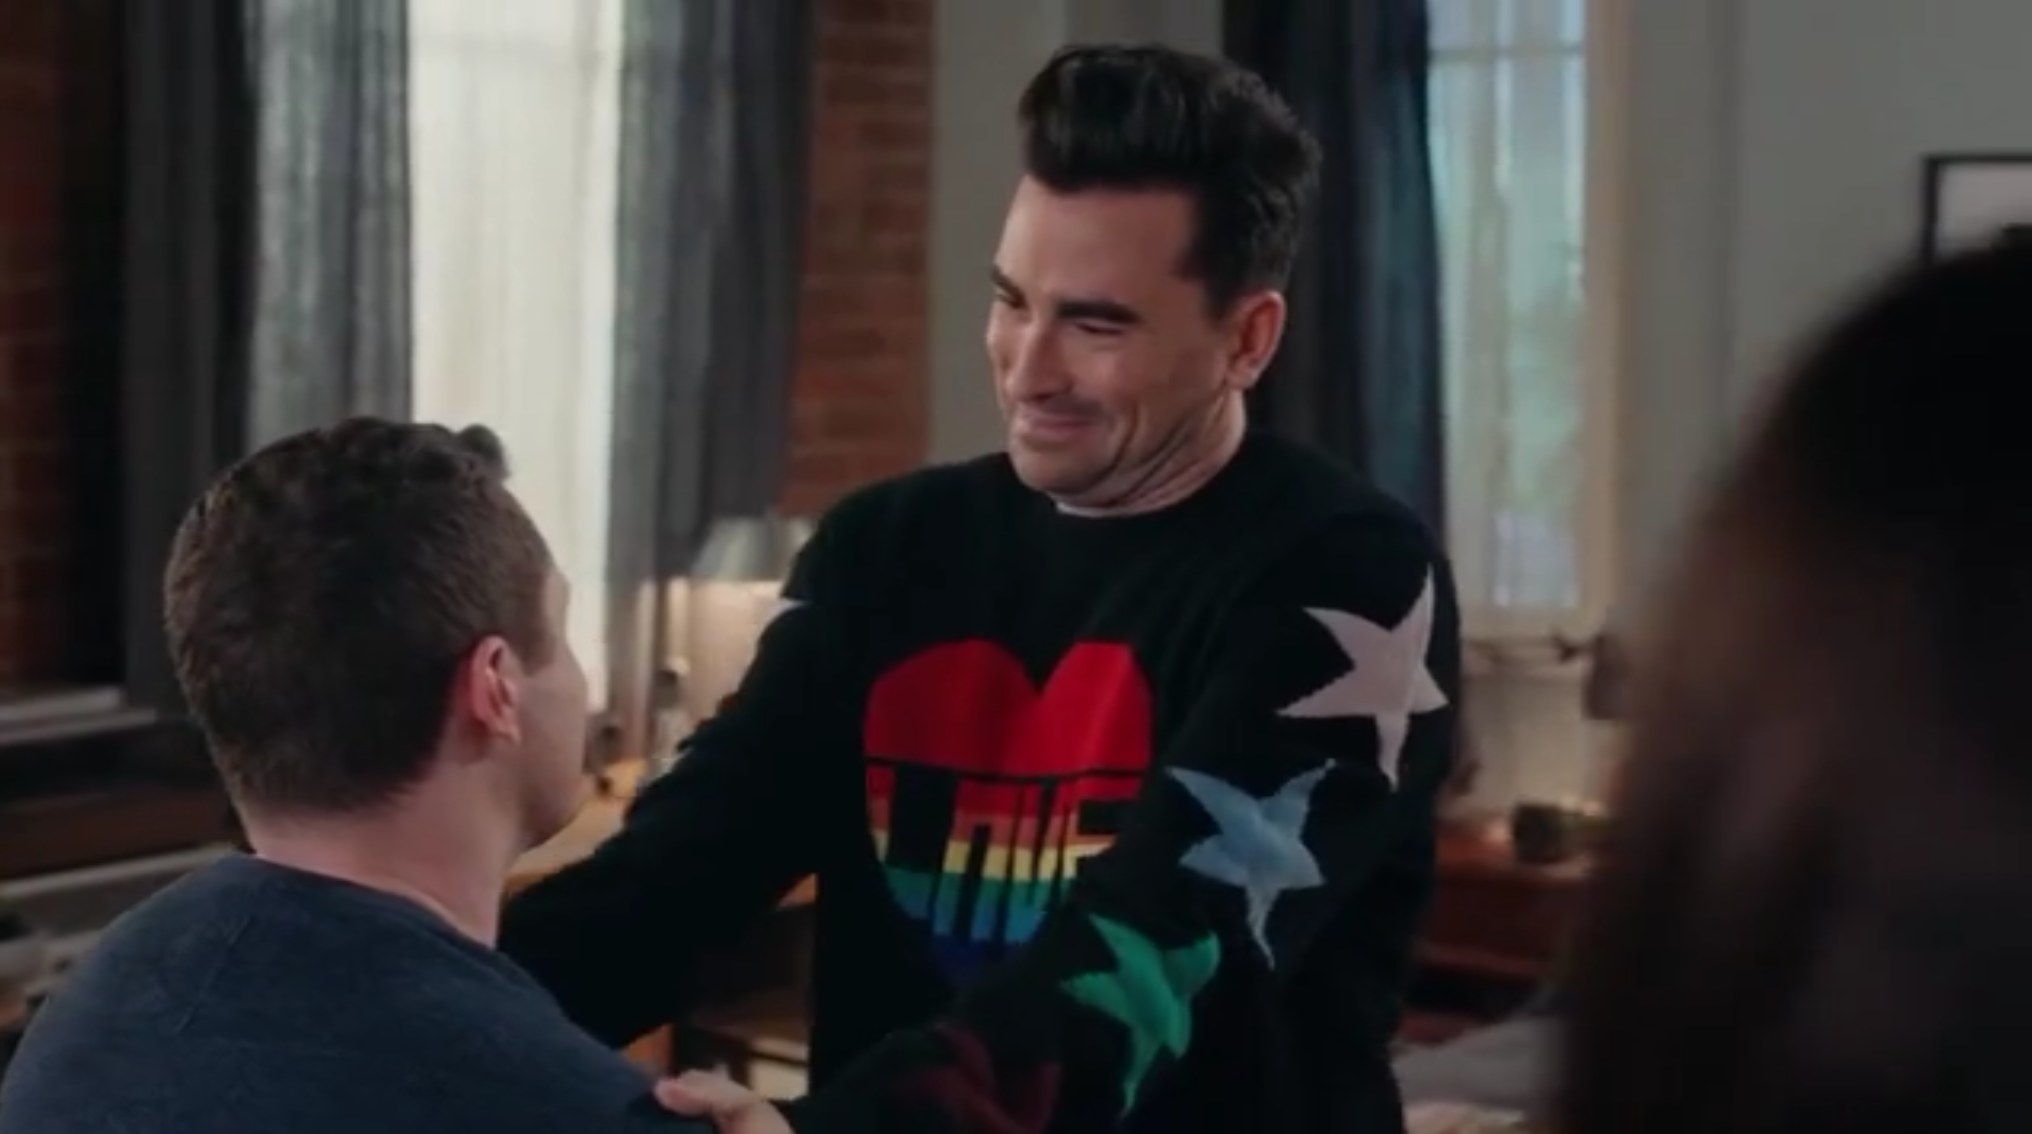 In a screenshot from the season finale, David Rose, wearing a sweater with a rainbow heart with the word &quot;LOVE&quot;, smiles down at his fiancé, Patrick. David has both hands on Patrick&#x27;s shoulders, Patrick is looking up at David, only his profile visible.